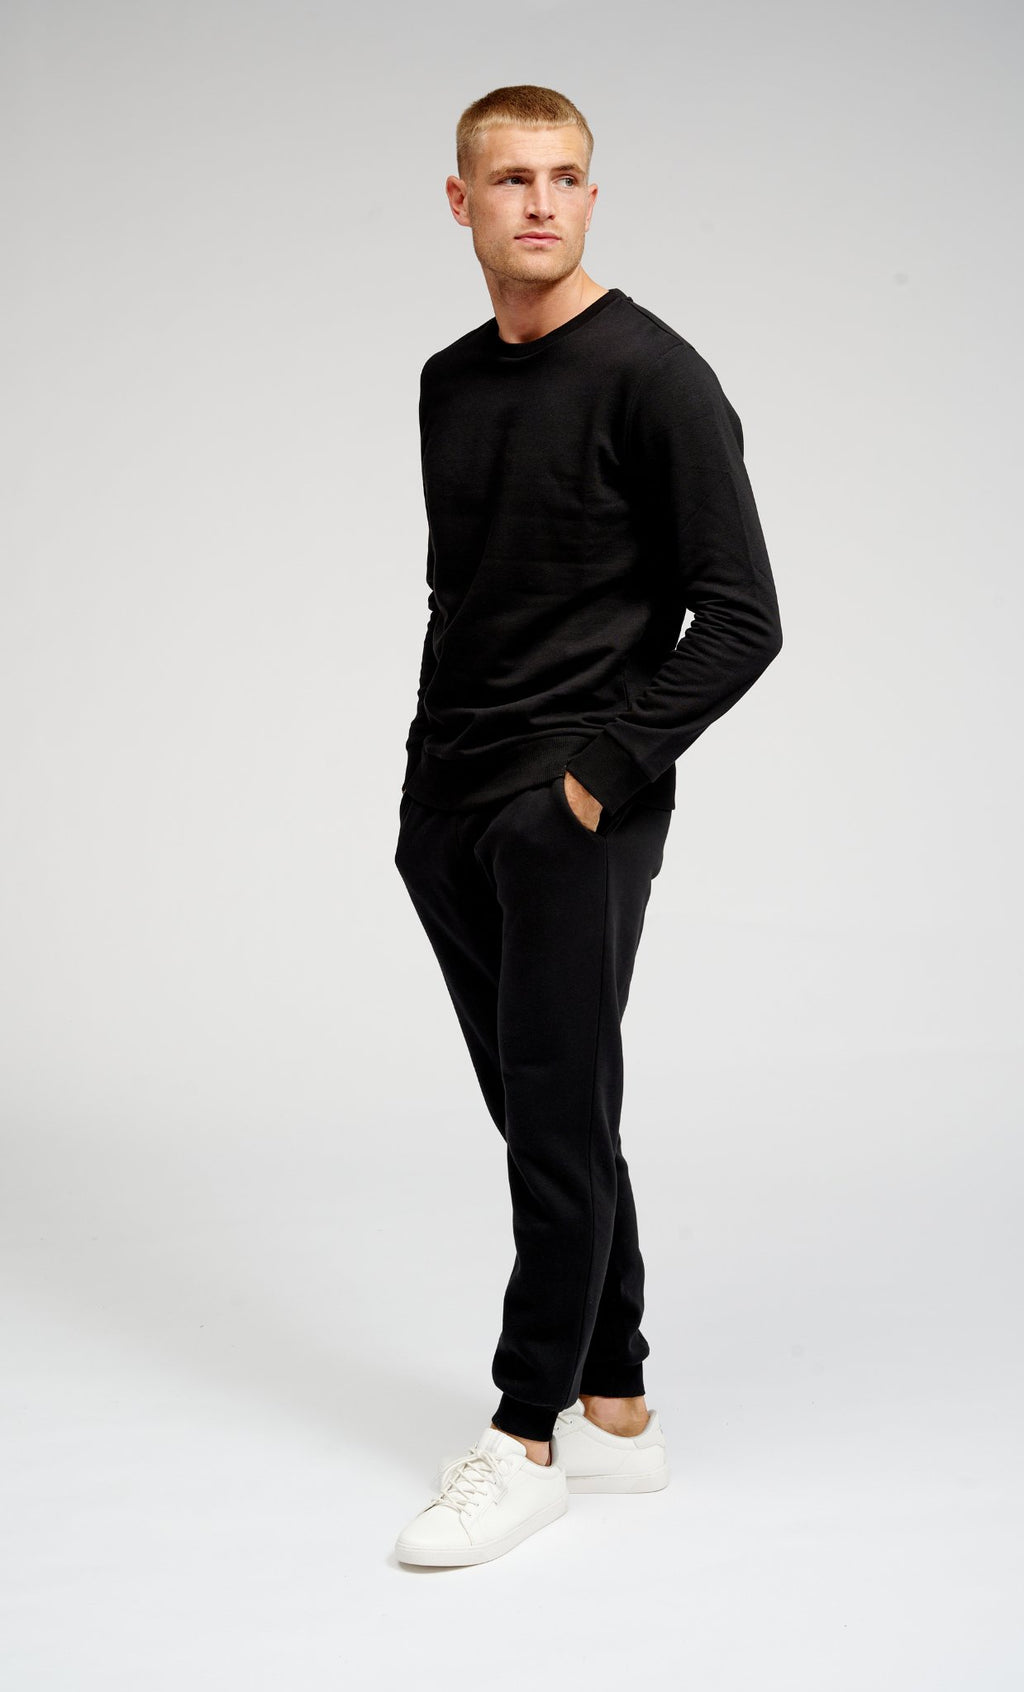 Basic Sweatsuit with Crewneck (Black) - Package Deal